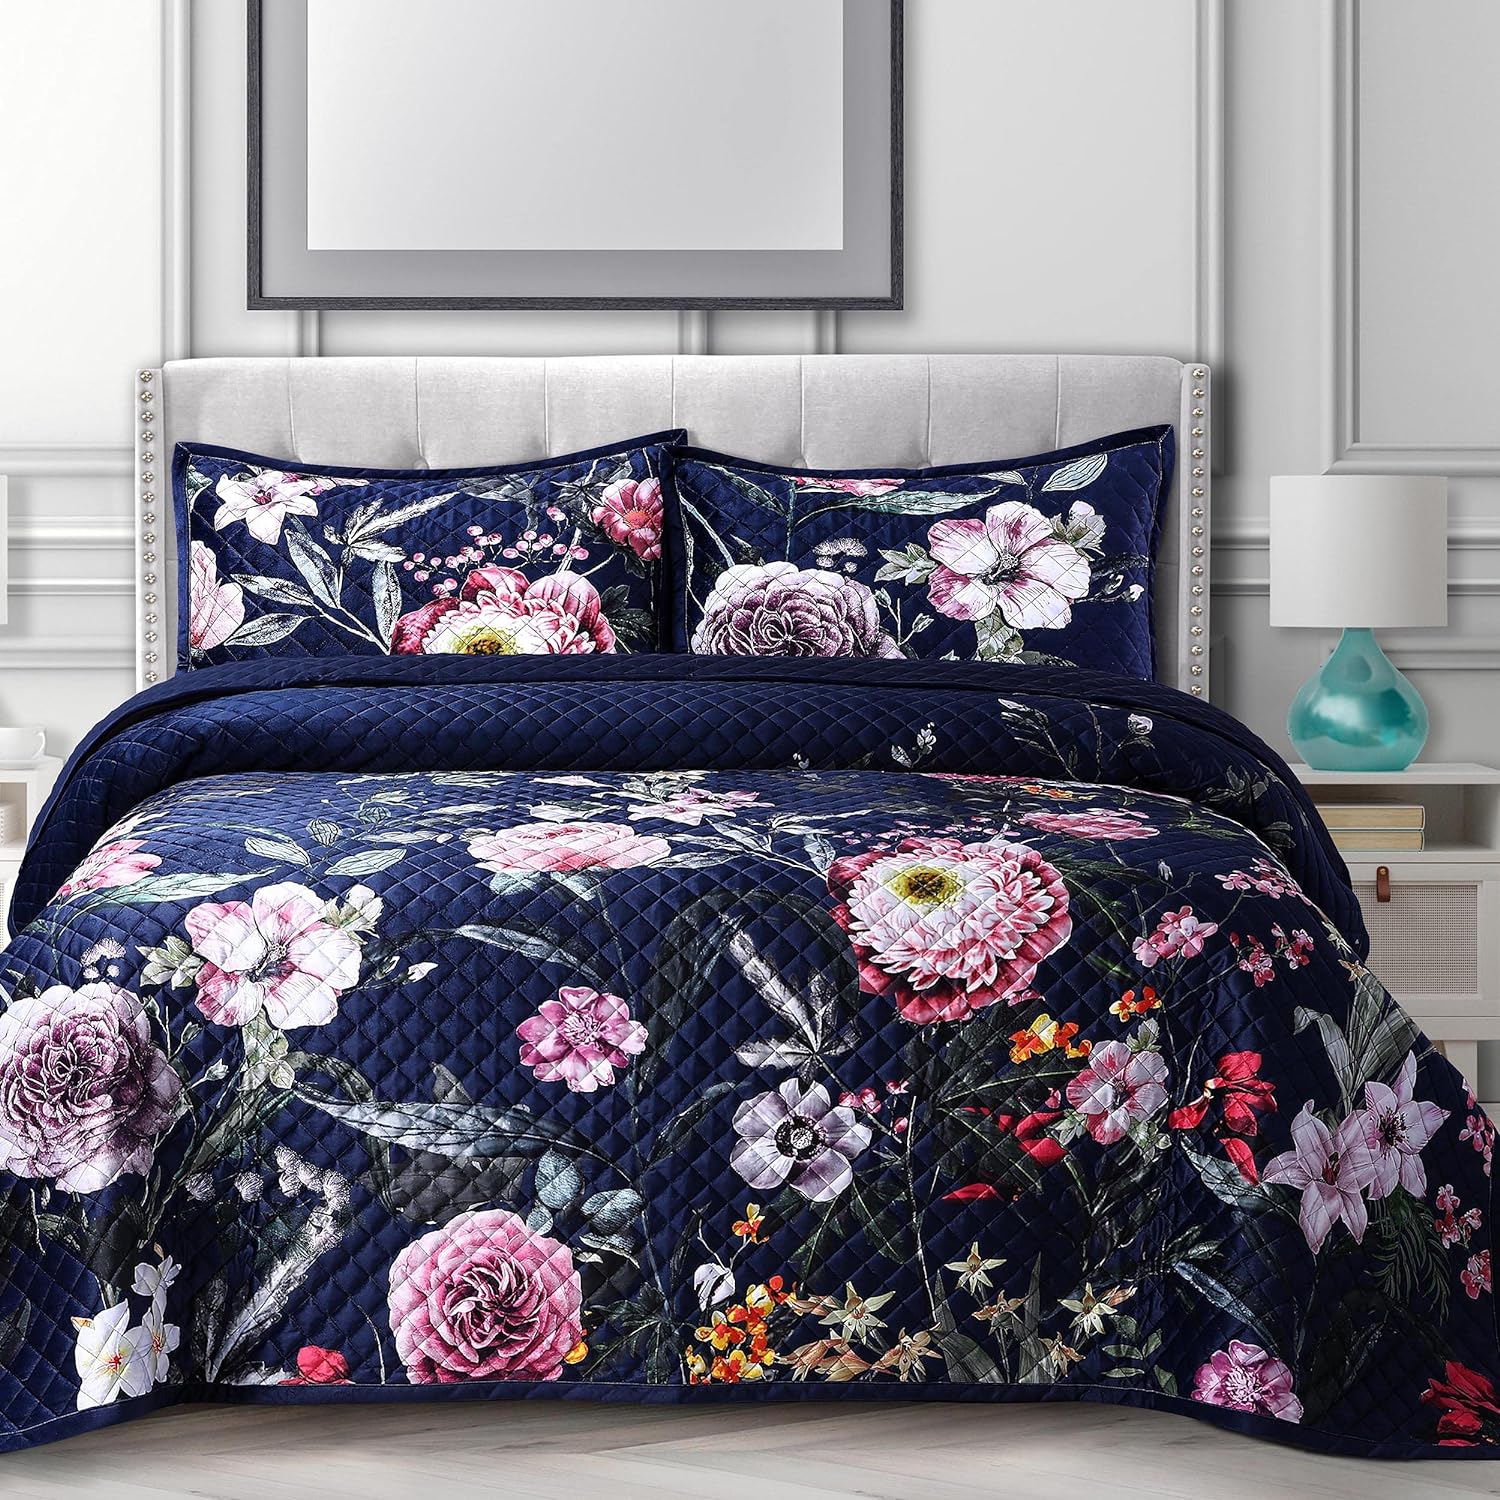 Zara Printed Oversized Velvet Ultra-Soft Luxury Quilt Set with Shams, Wrinkle & Fade Resitant, All-Season, Diamond Stitching, Durable and Fine Quality, Twin, Multicolor